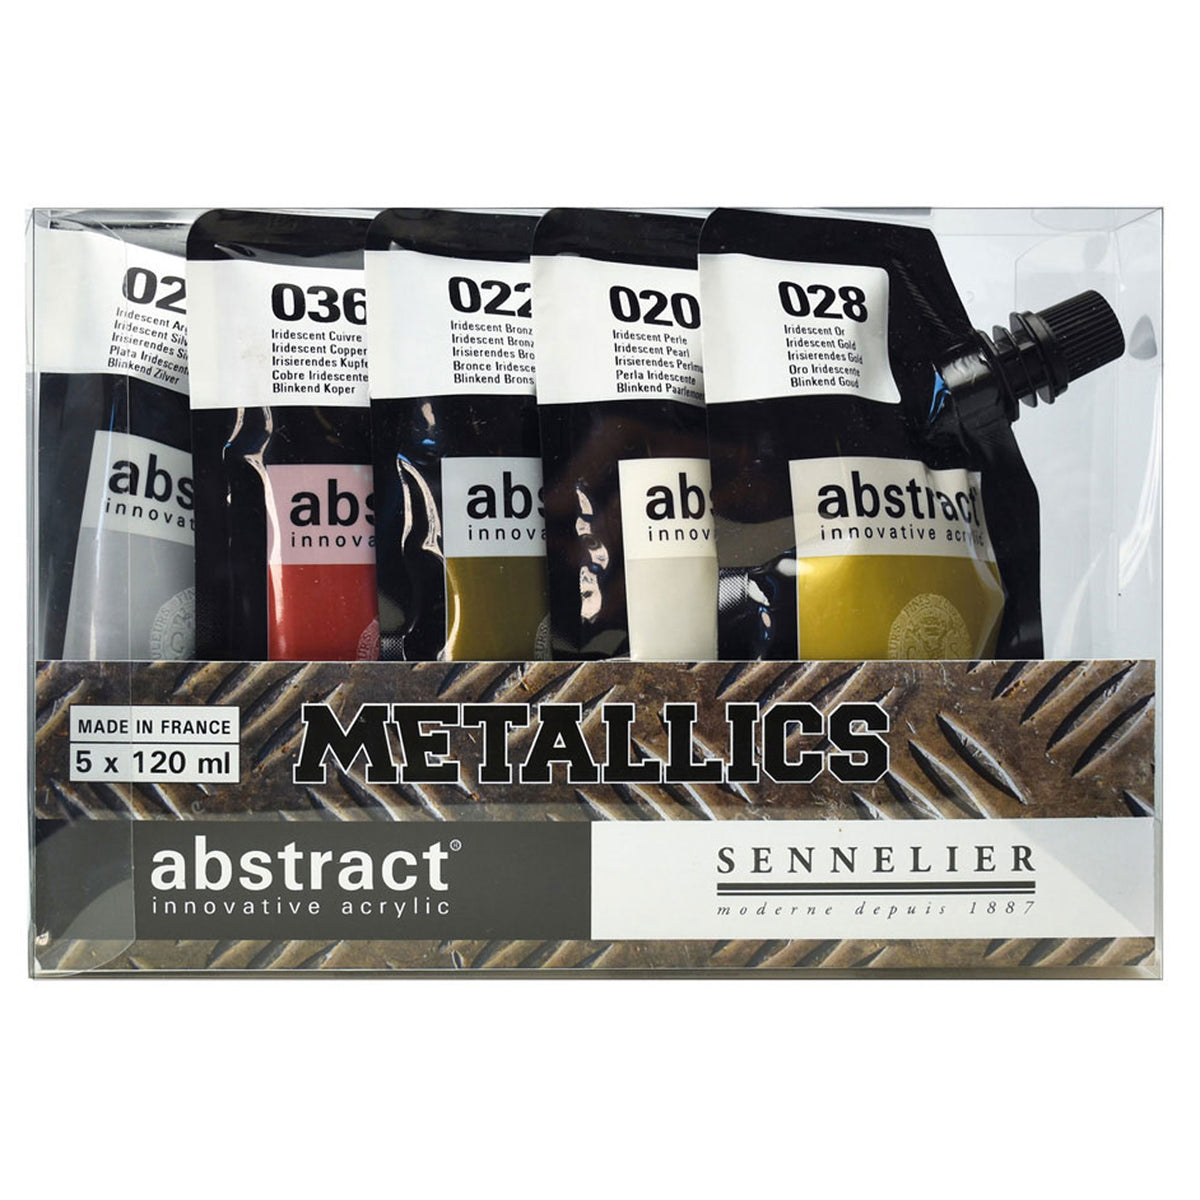 Sennelier Abstract Acrylic Paint Pouches - 5 x 120ml - Metallics